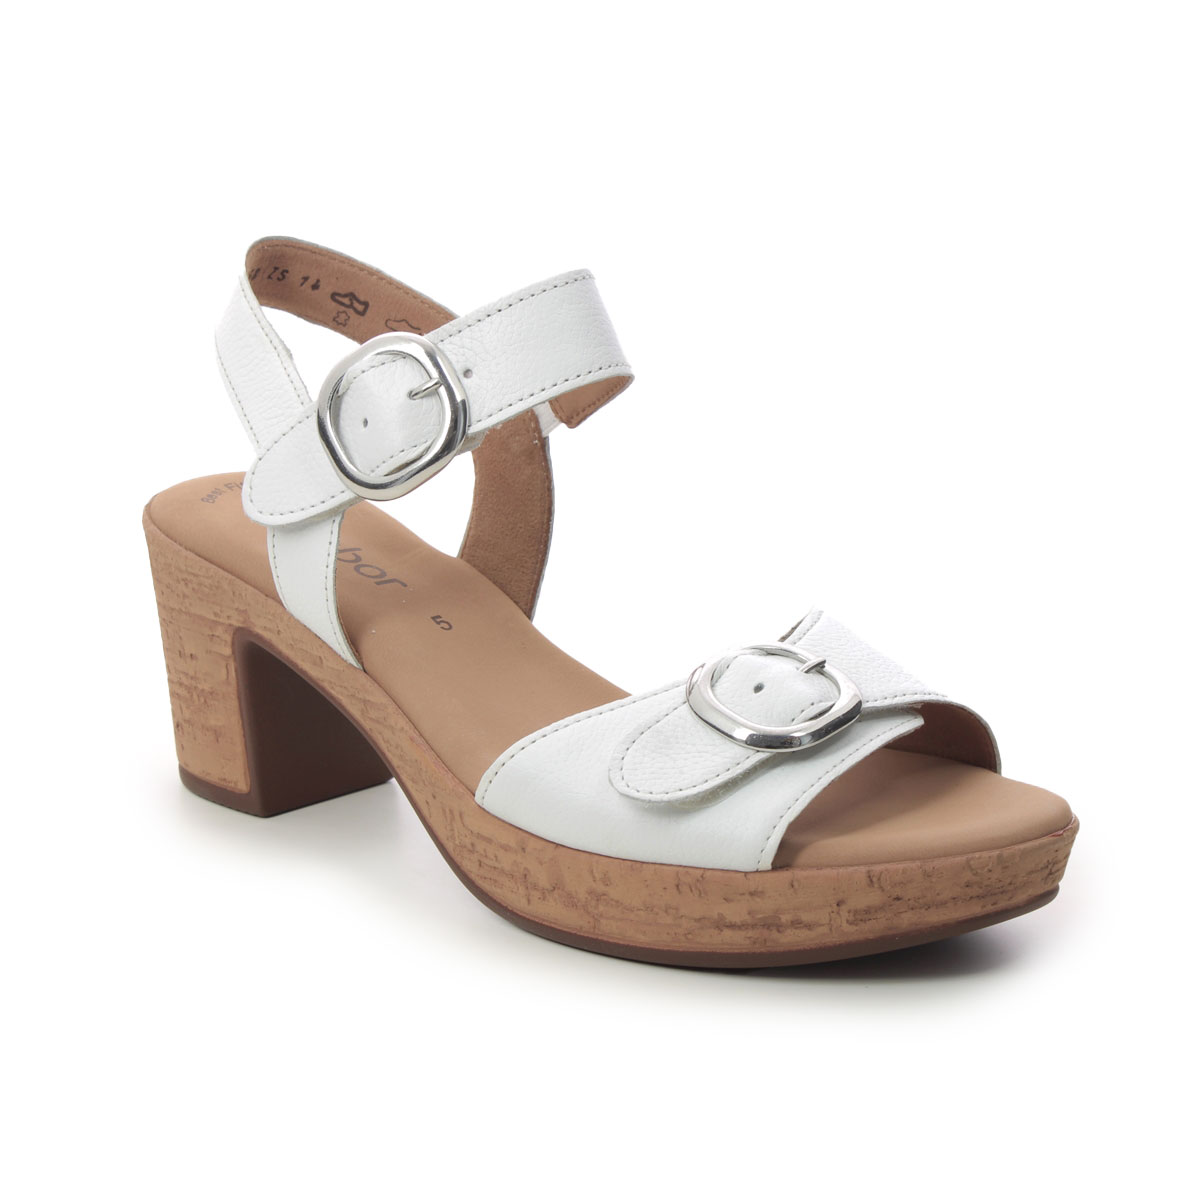 Gabor Fantastica WHITE LEATHER Womens Wedge Sandals 24.764.21 in a Plain Leather in Size 3